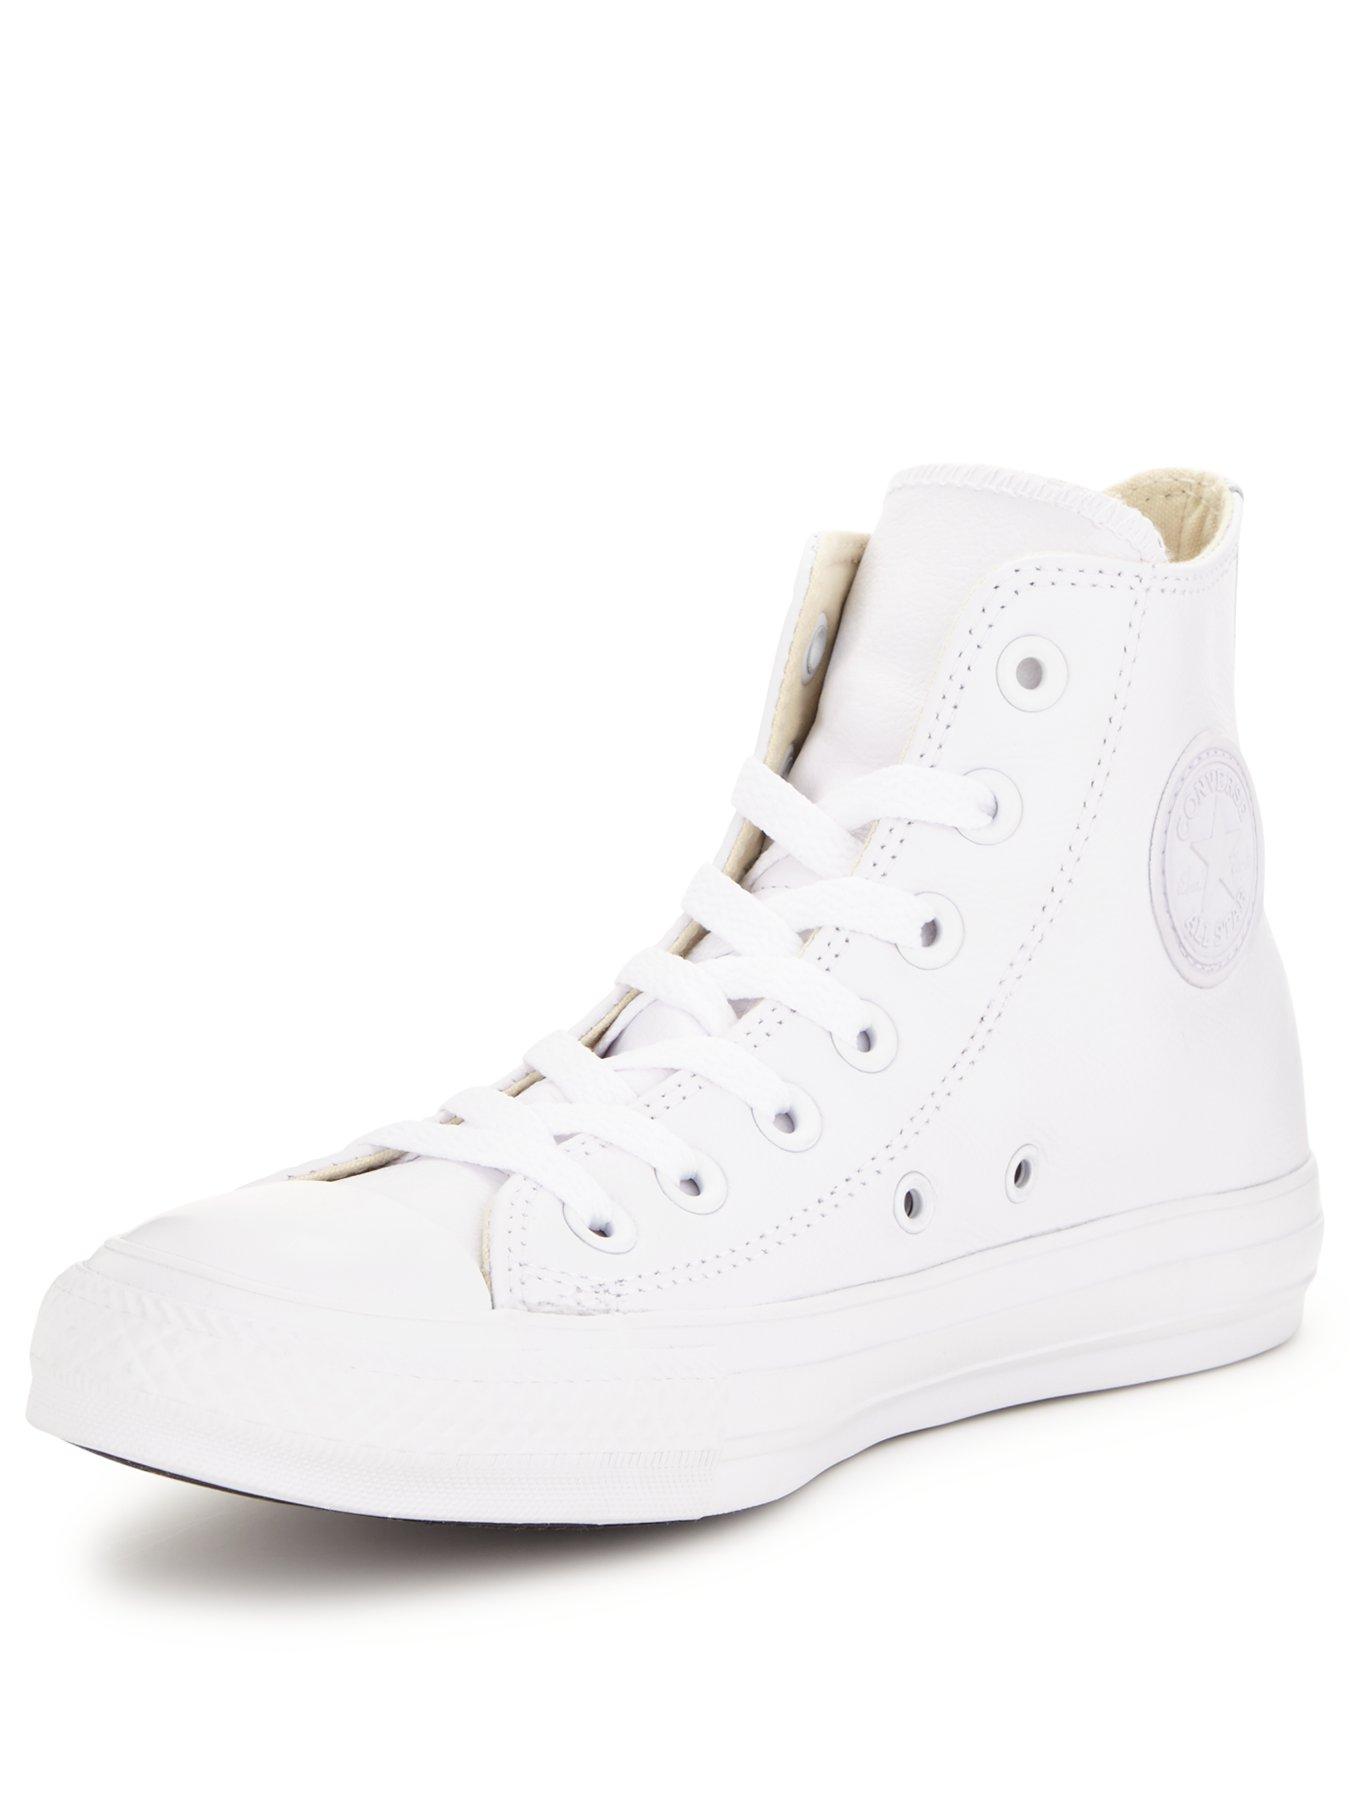 all white leather converse